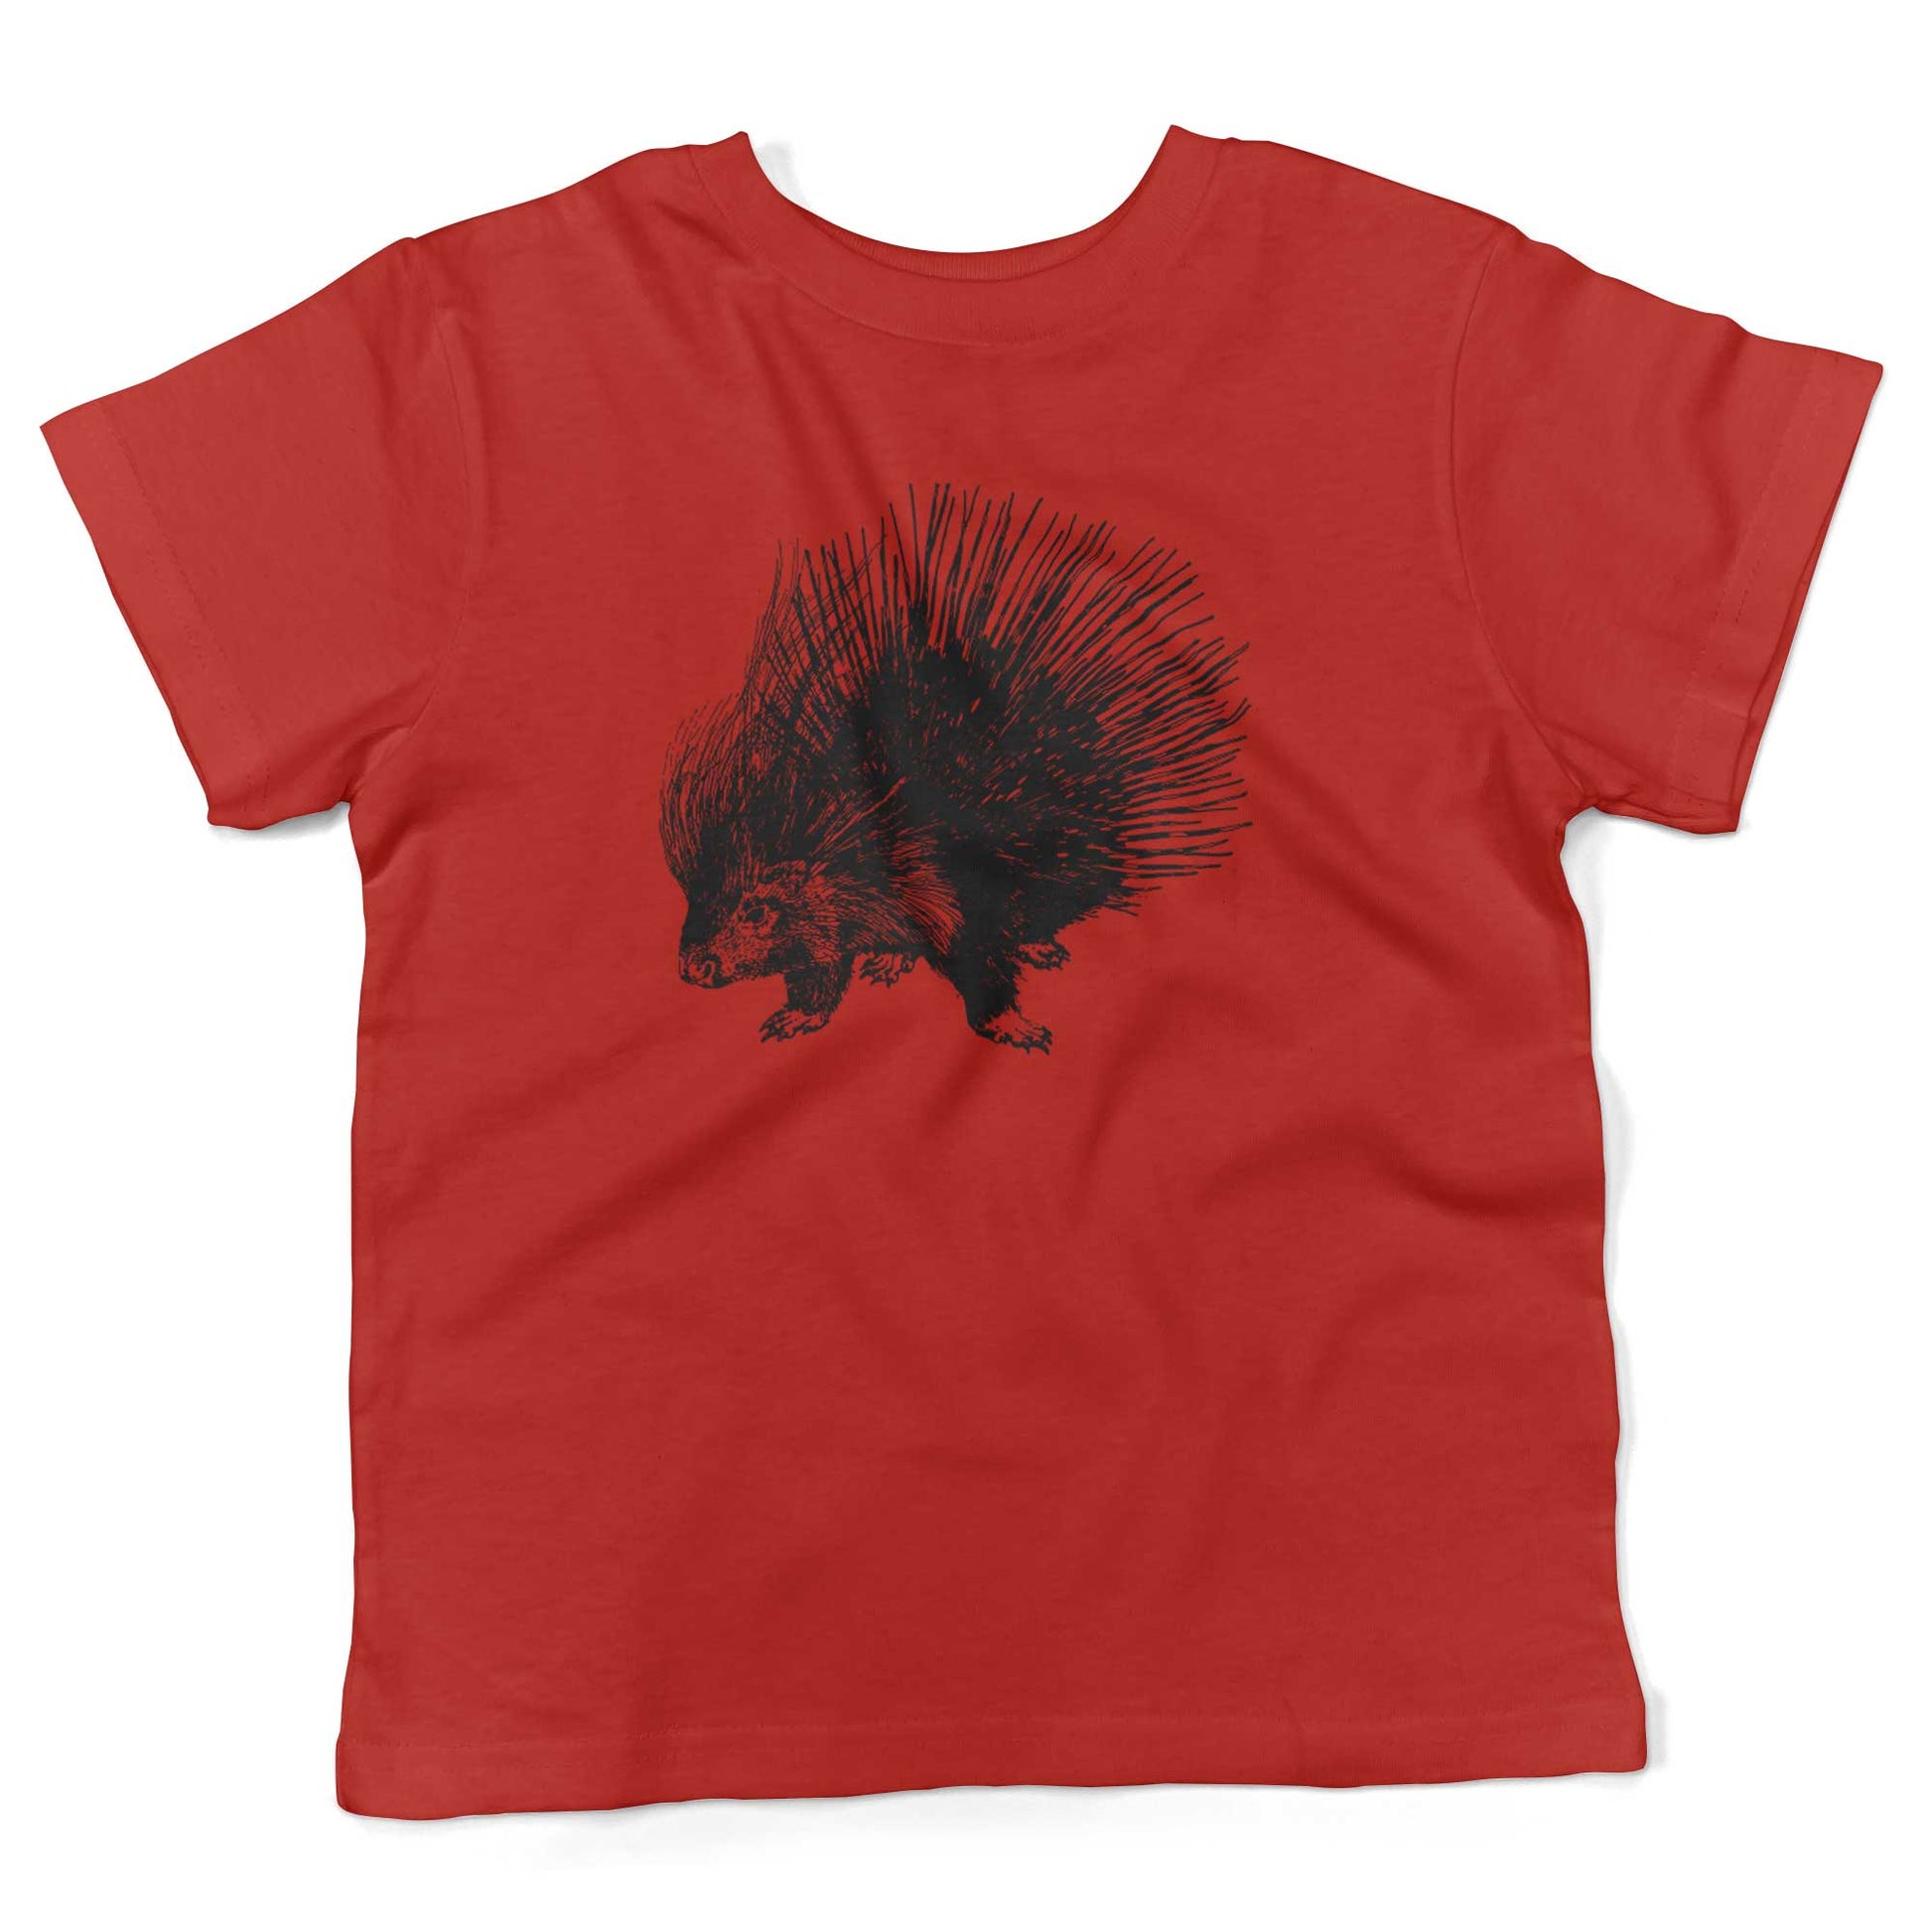 Cute Porcupine Toddler Shirt-Red-2T